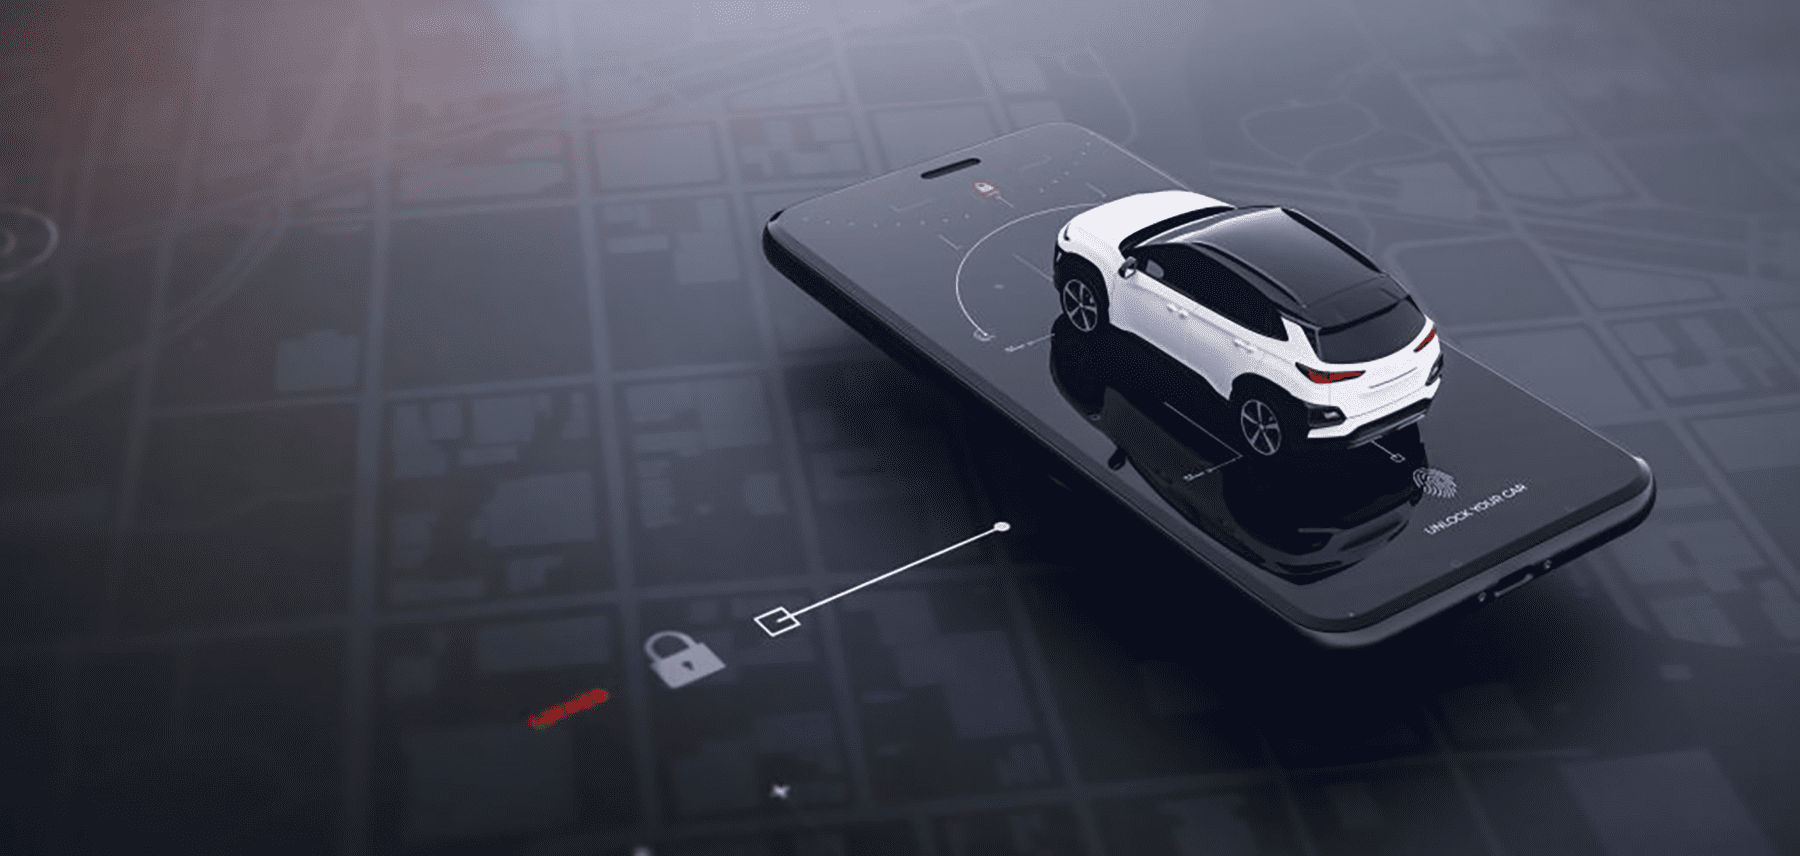 Resized_What are the greatest challenges of automotive cybersecurity and data privacy for connected cars 2